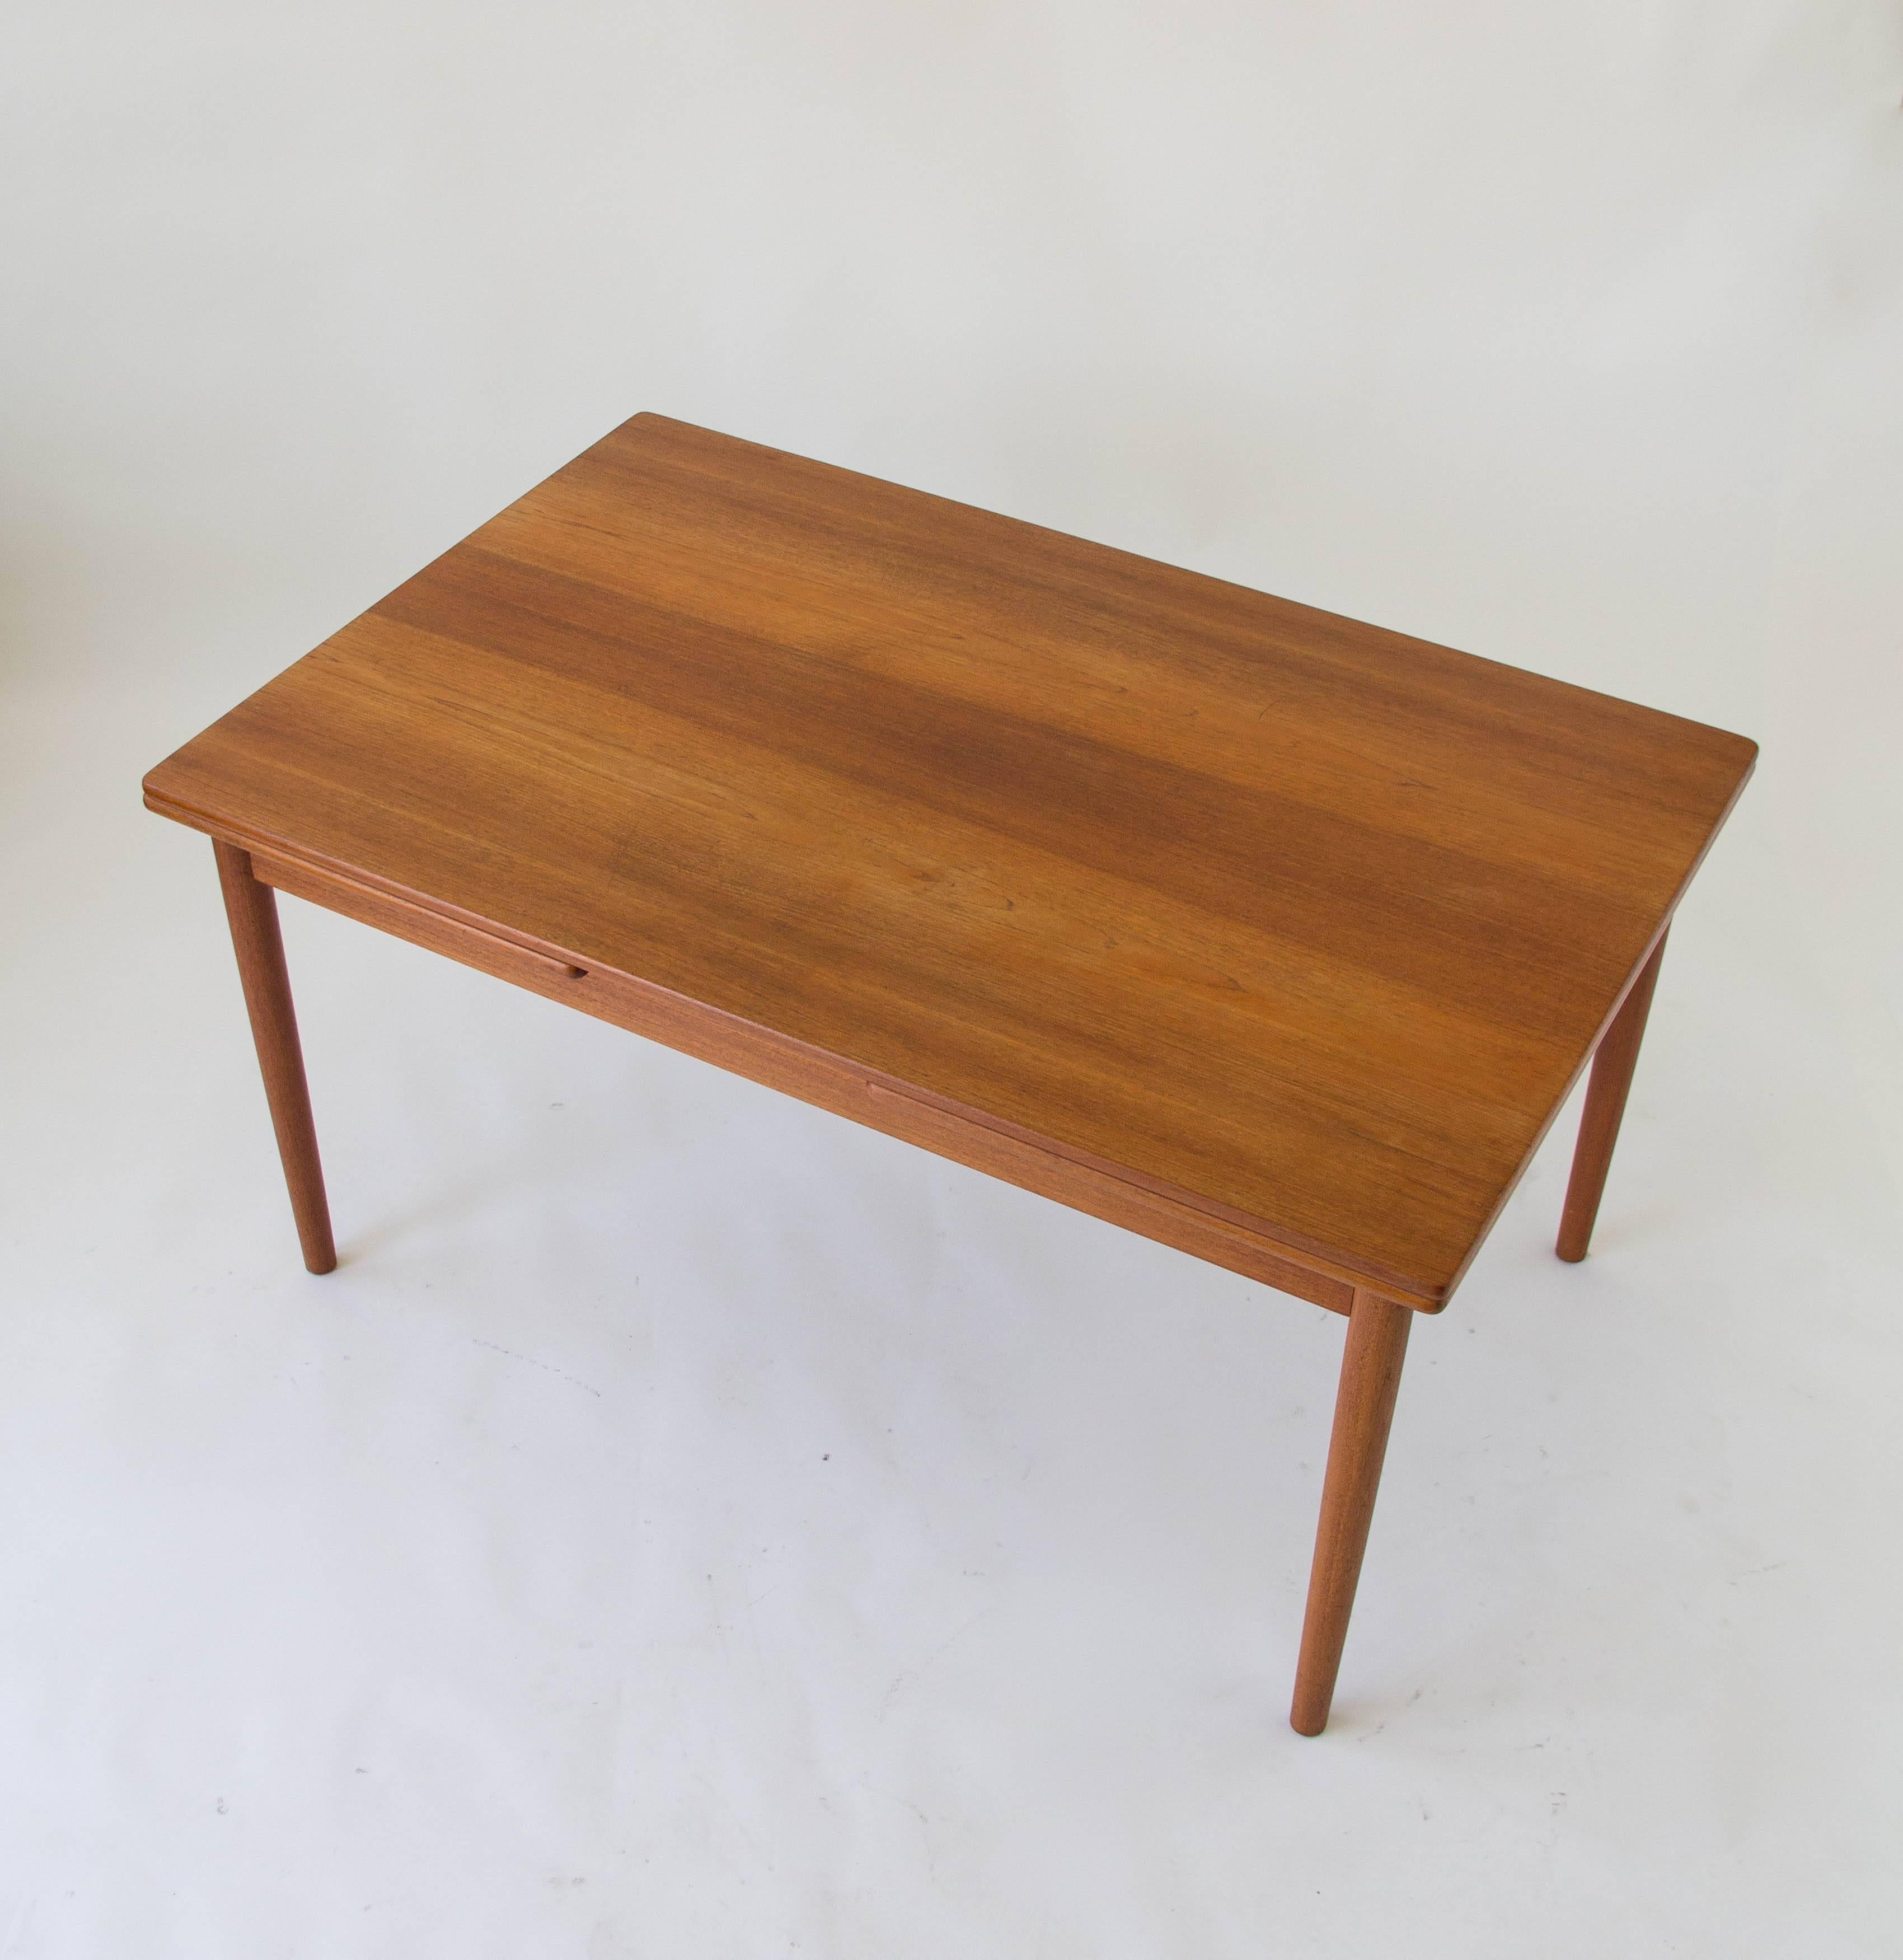 Rare teak dining table by Hans J. Wegner for Andreas Tuck. Designed in the 1950s, the table has two extension leaves that draw out from beneath the tabletop, and raise to sit flush at their full length. The underside is stamped, “Fabrikat: Andr.